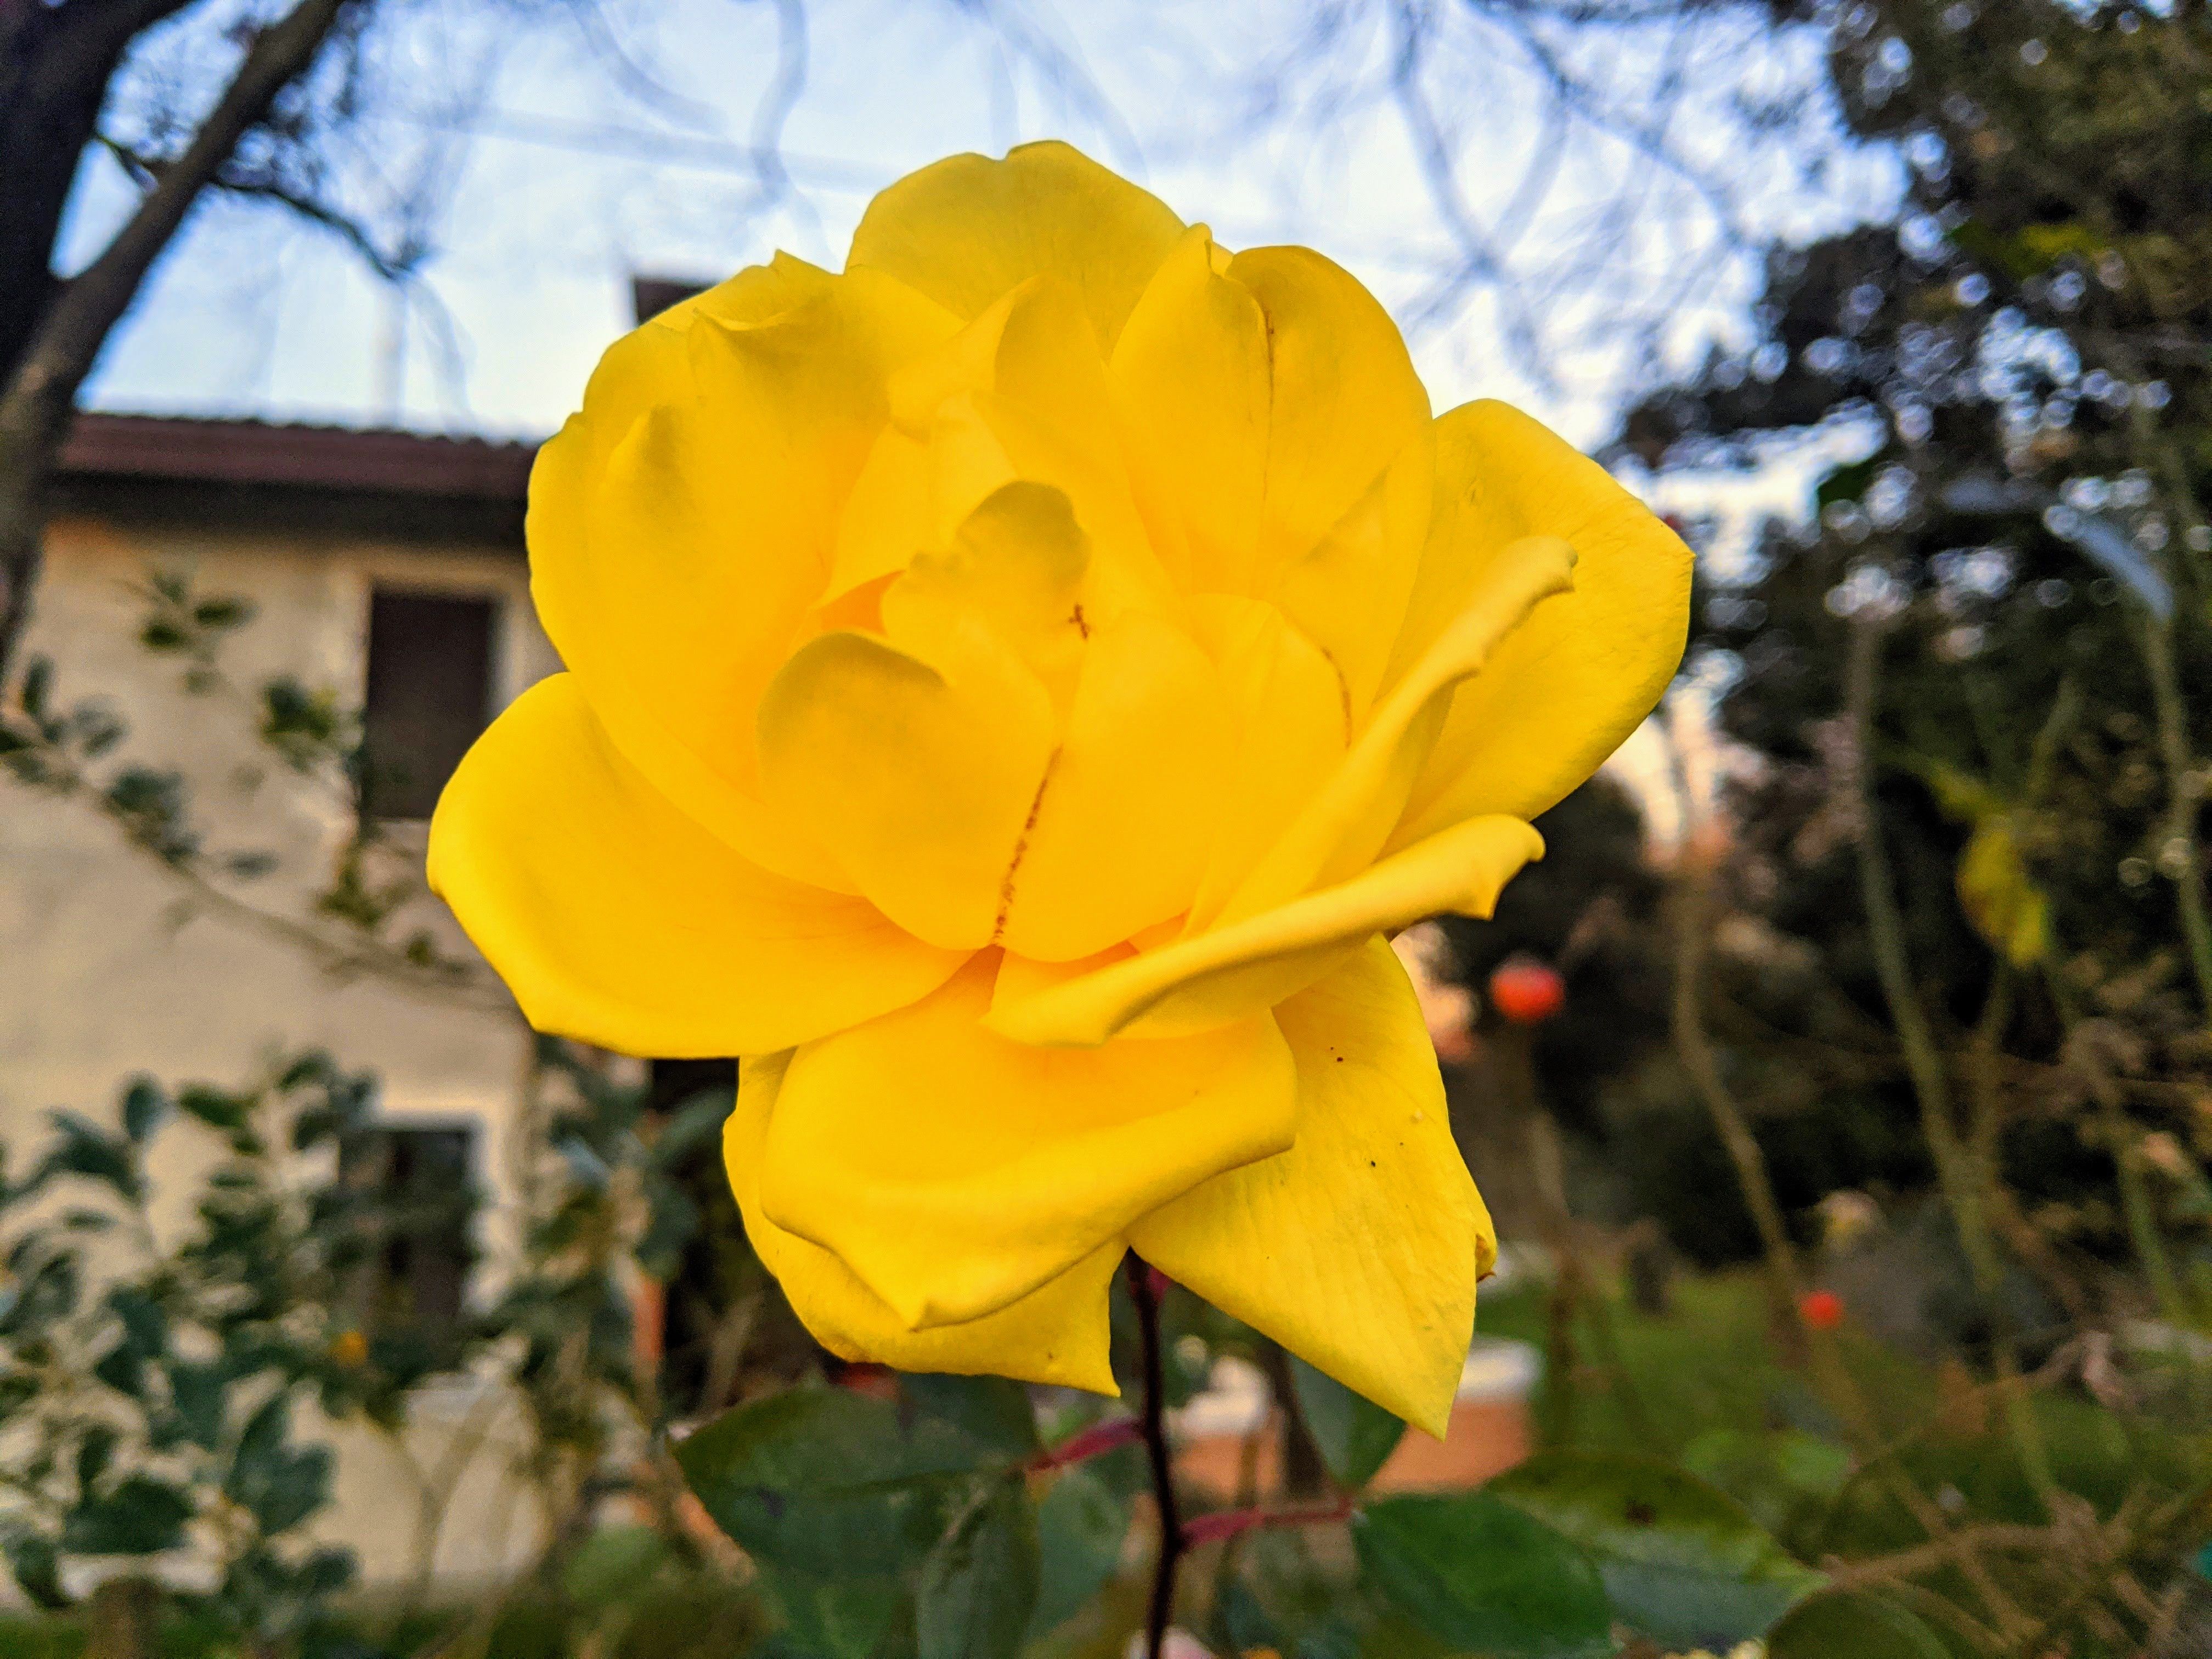 Caption: a beautiful Yellow rose, on January 3rd - Photo credit: Local Guide @ermest